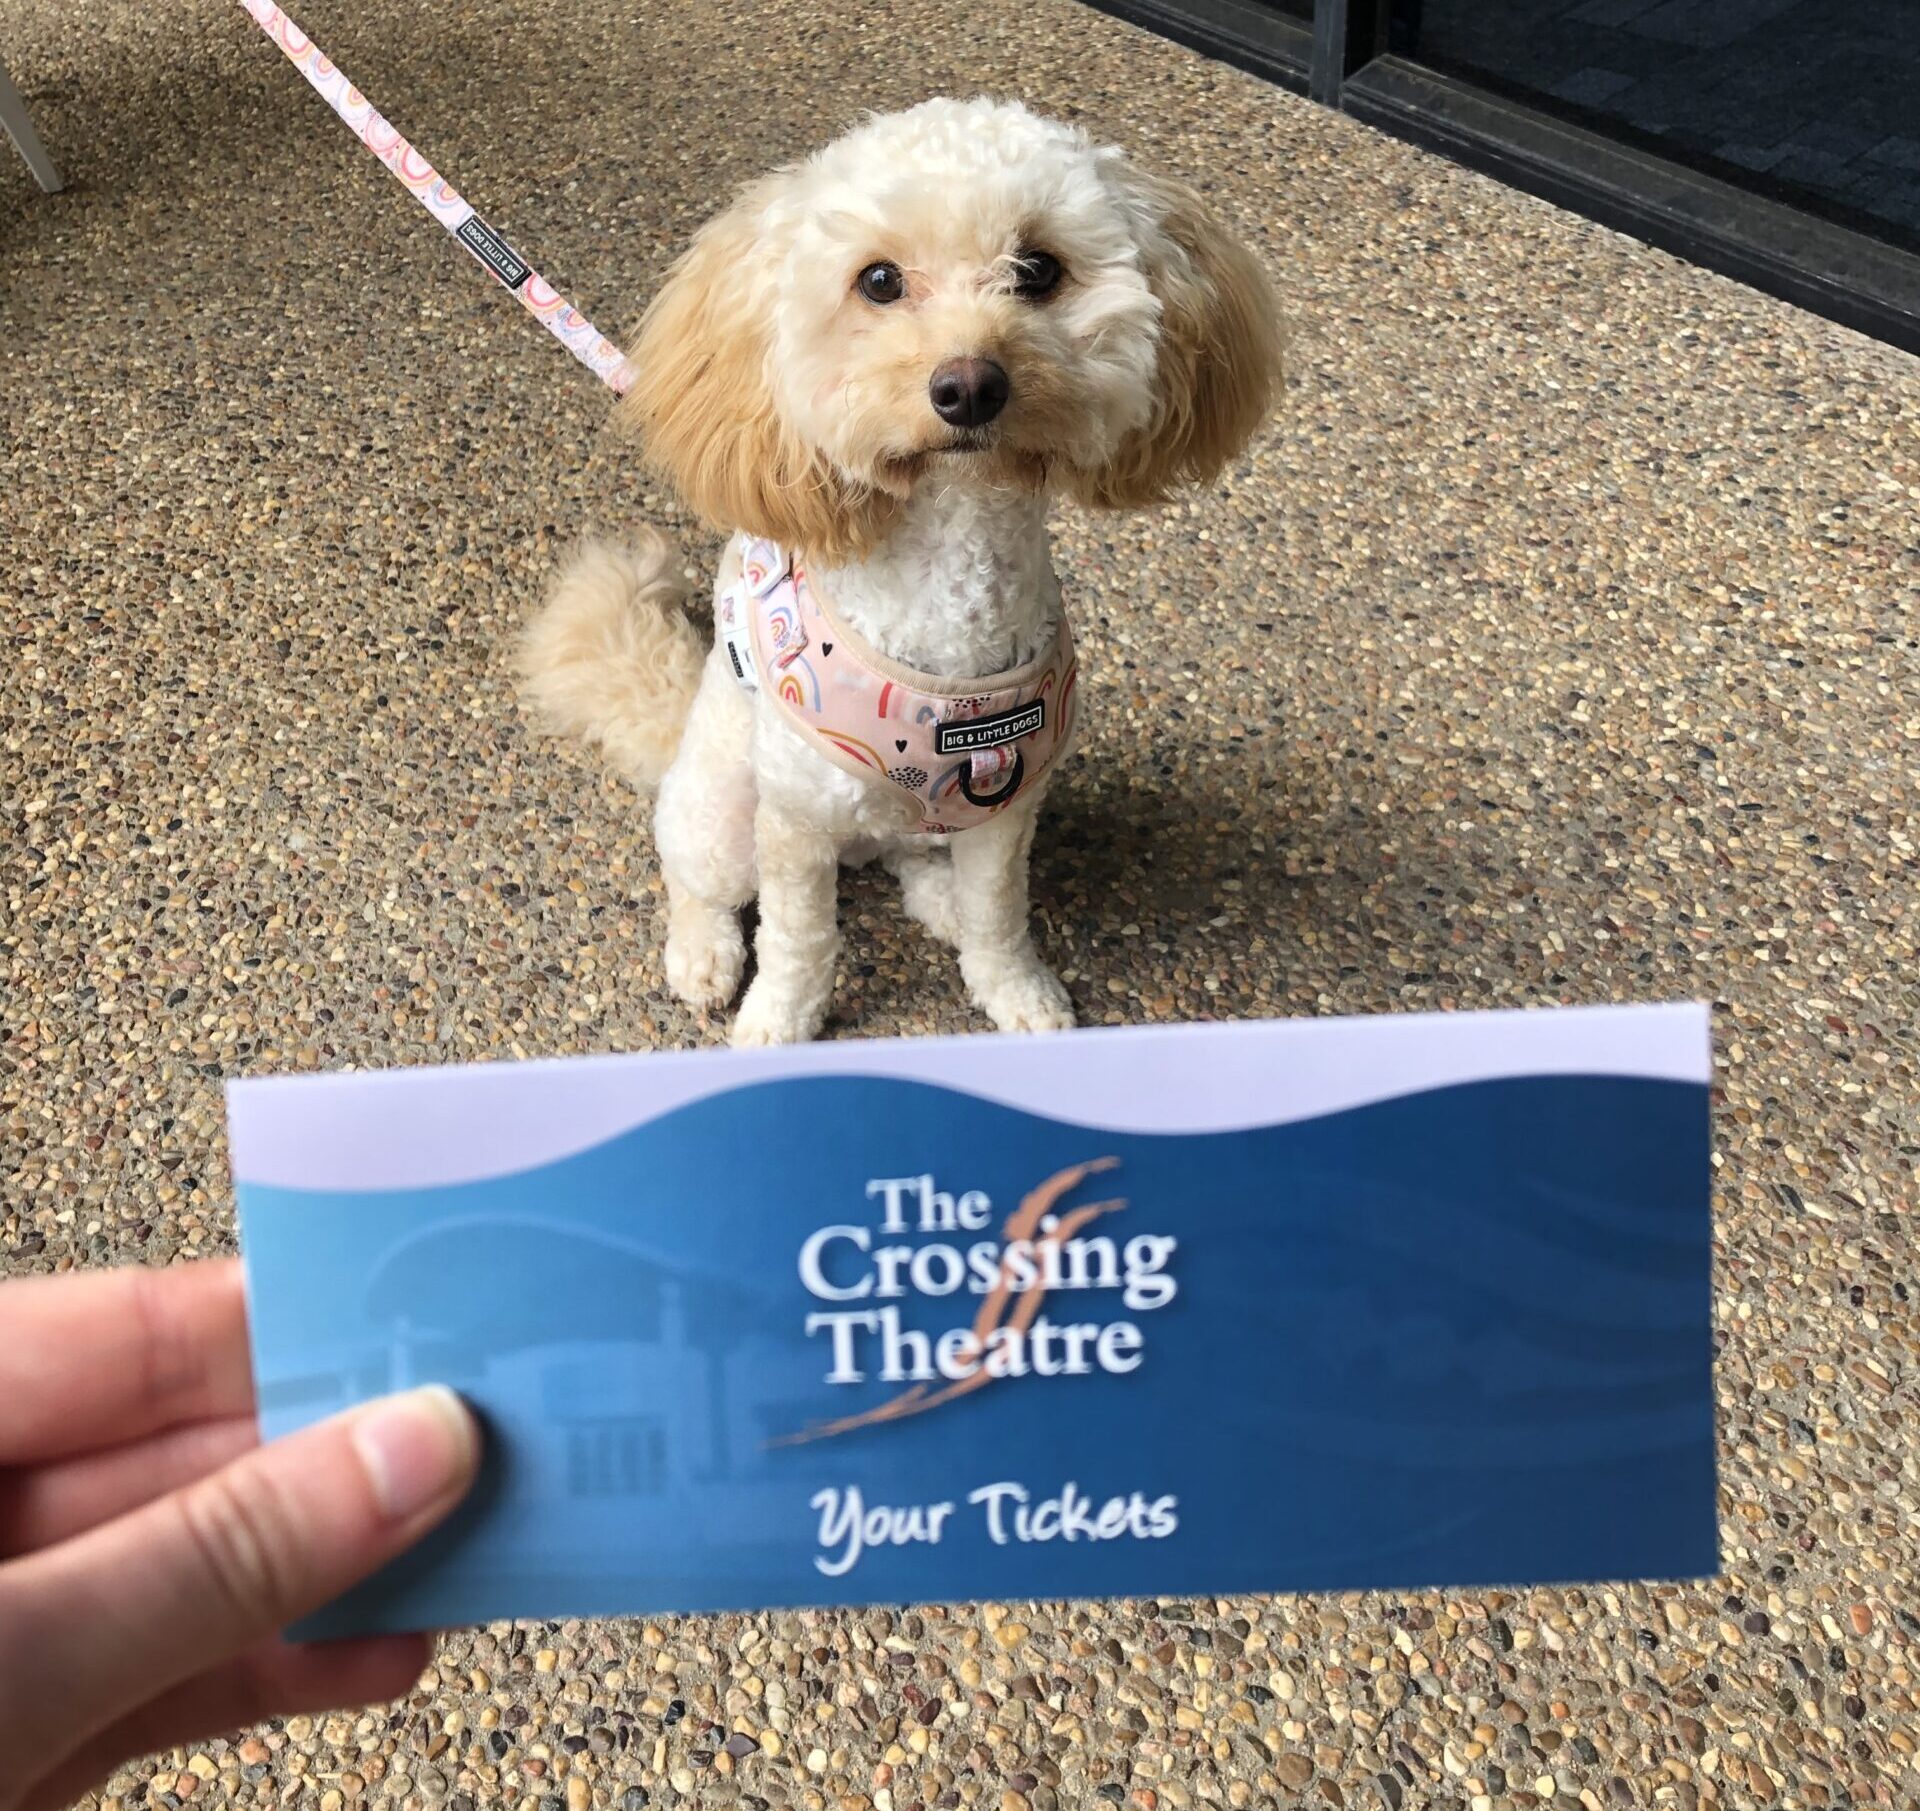 Jane and Caramel received two movie vouchers for The Crossing Theatre, as a thank you for being the first pet to visit the café.